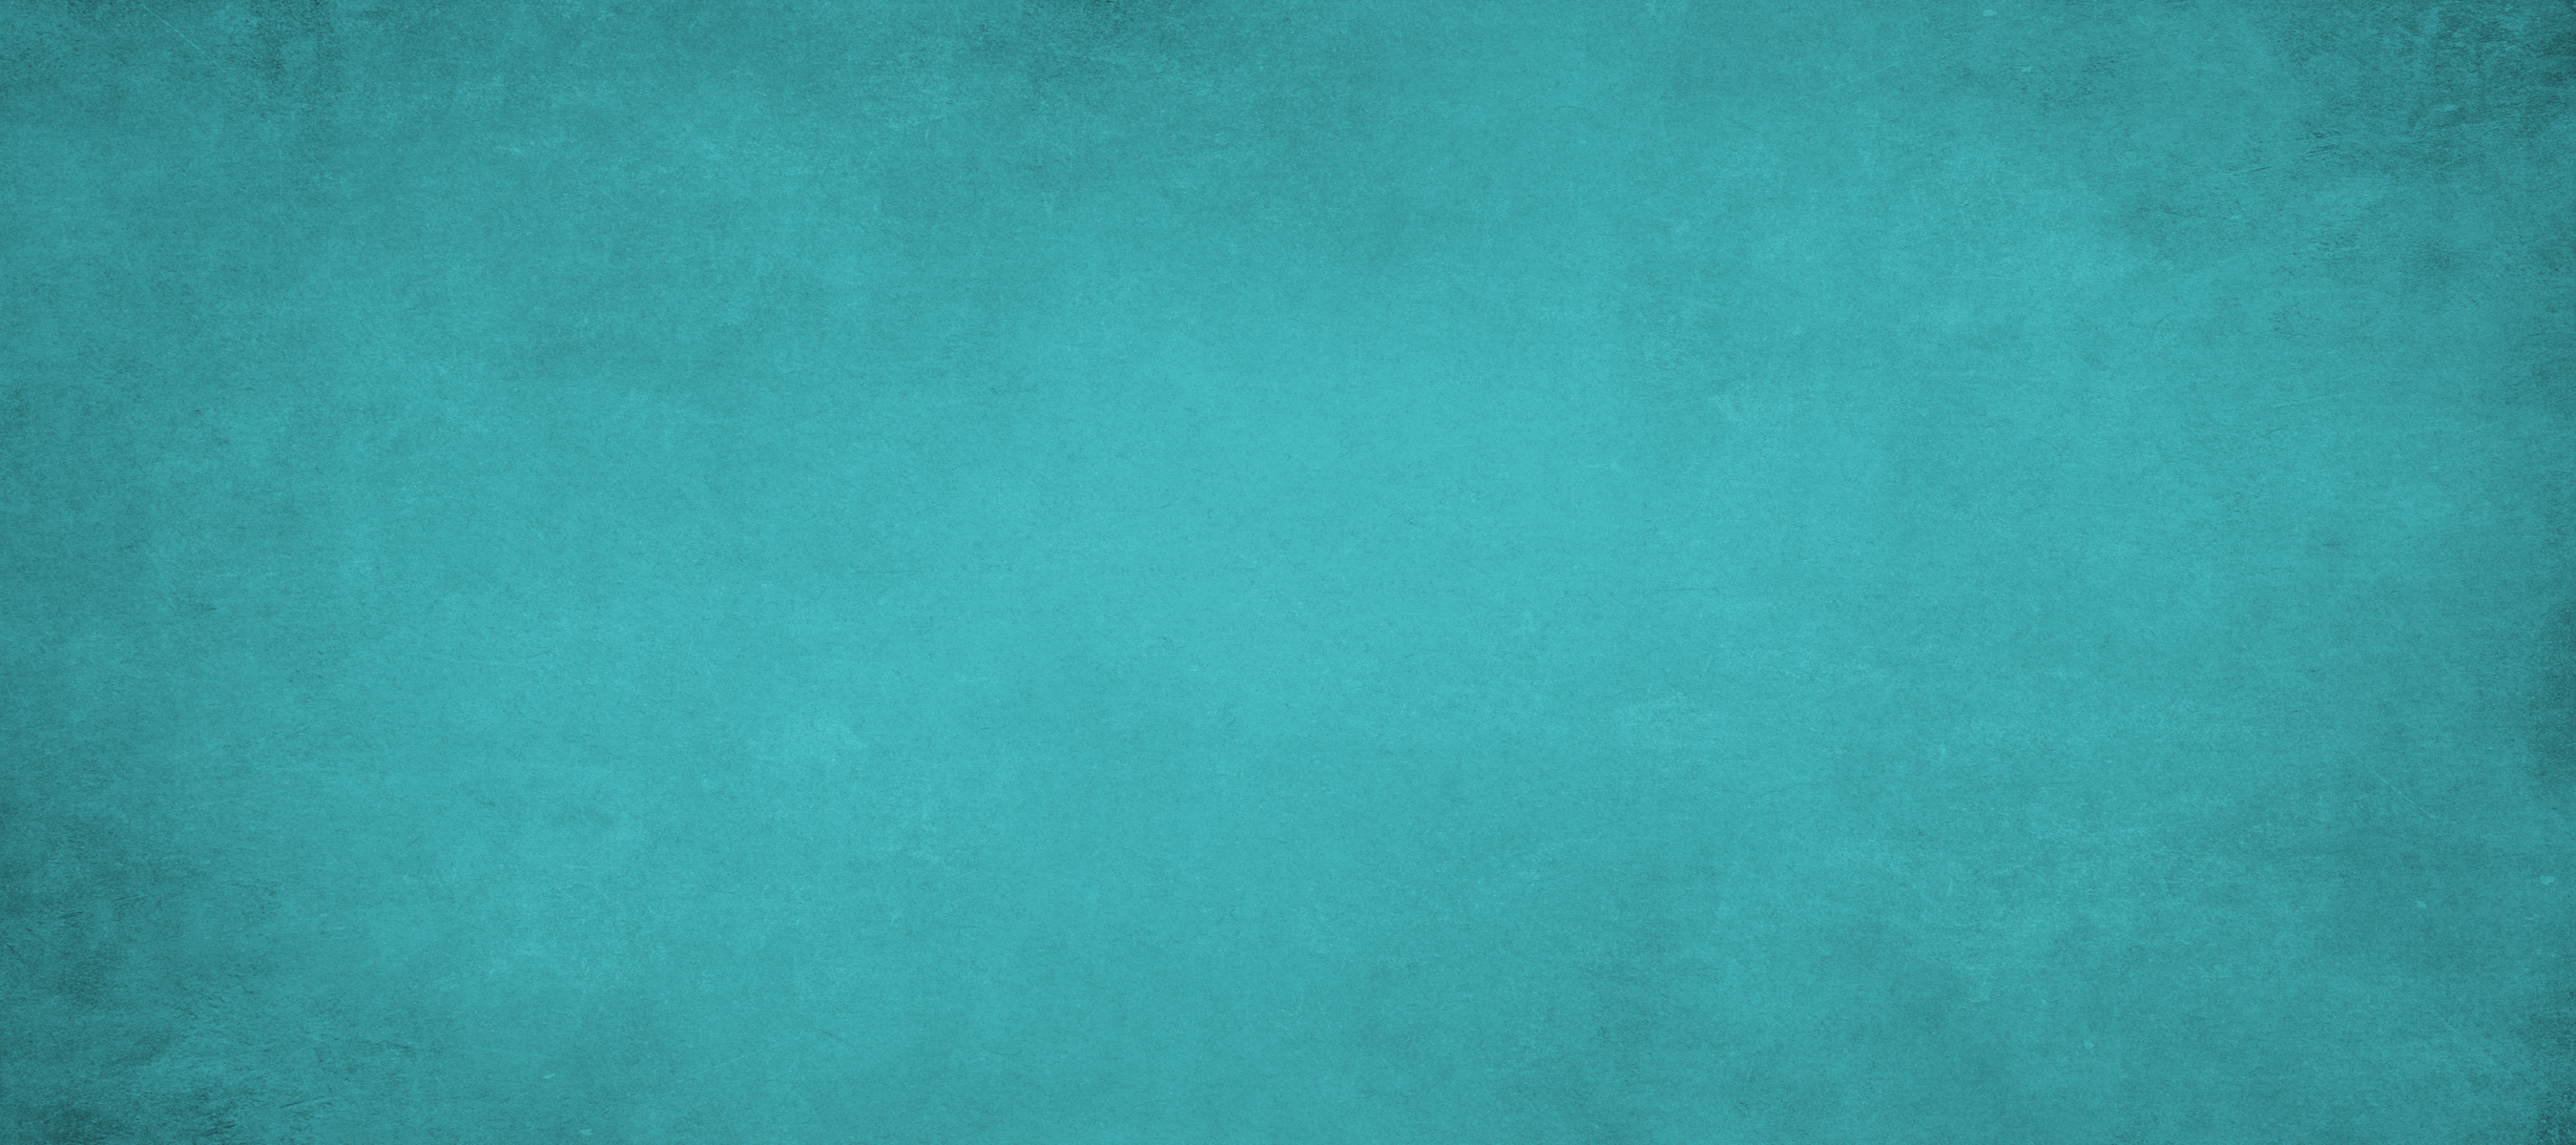 Teal Paper Background Texture